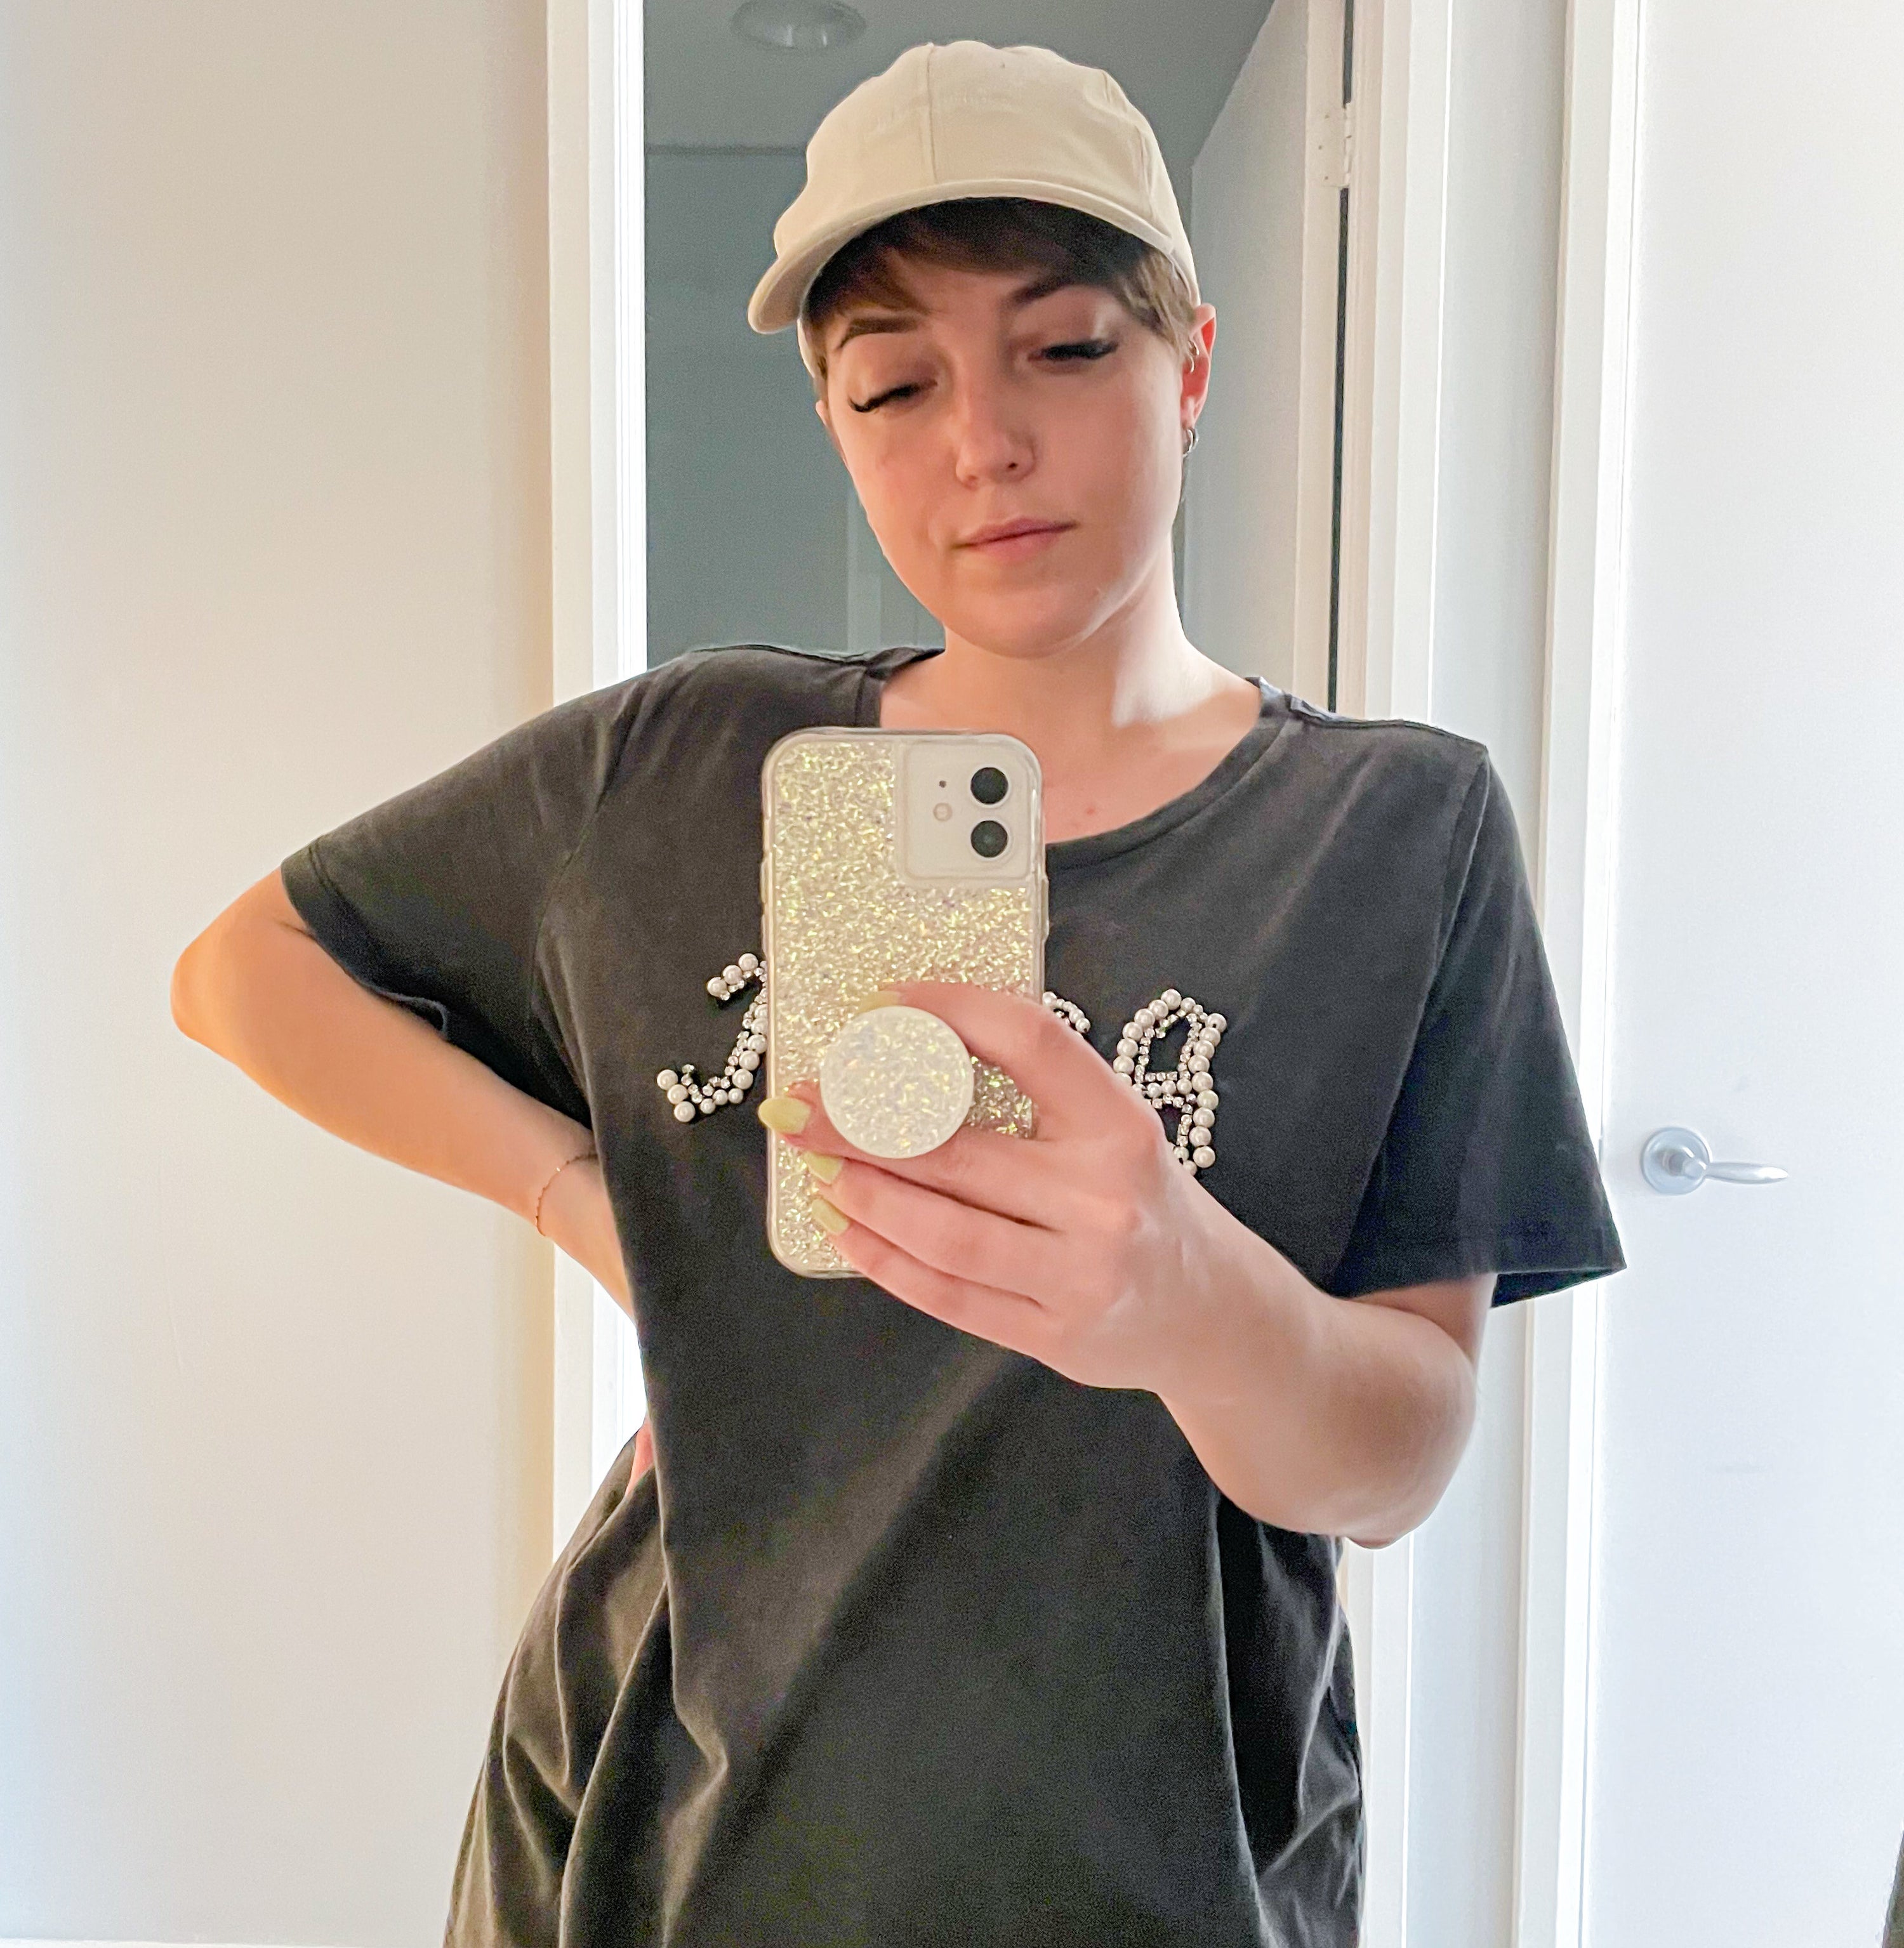 victoria wearing the cap while taking a selfie